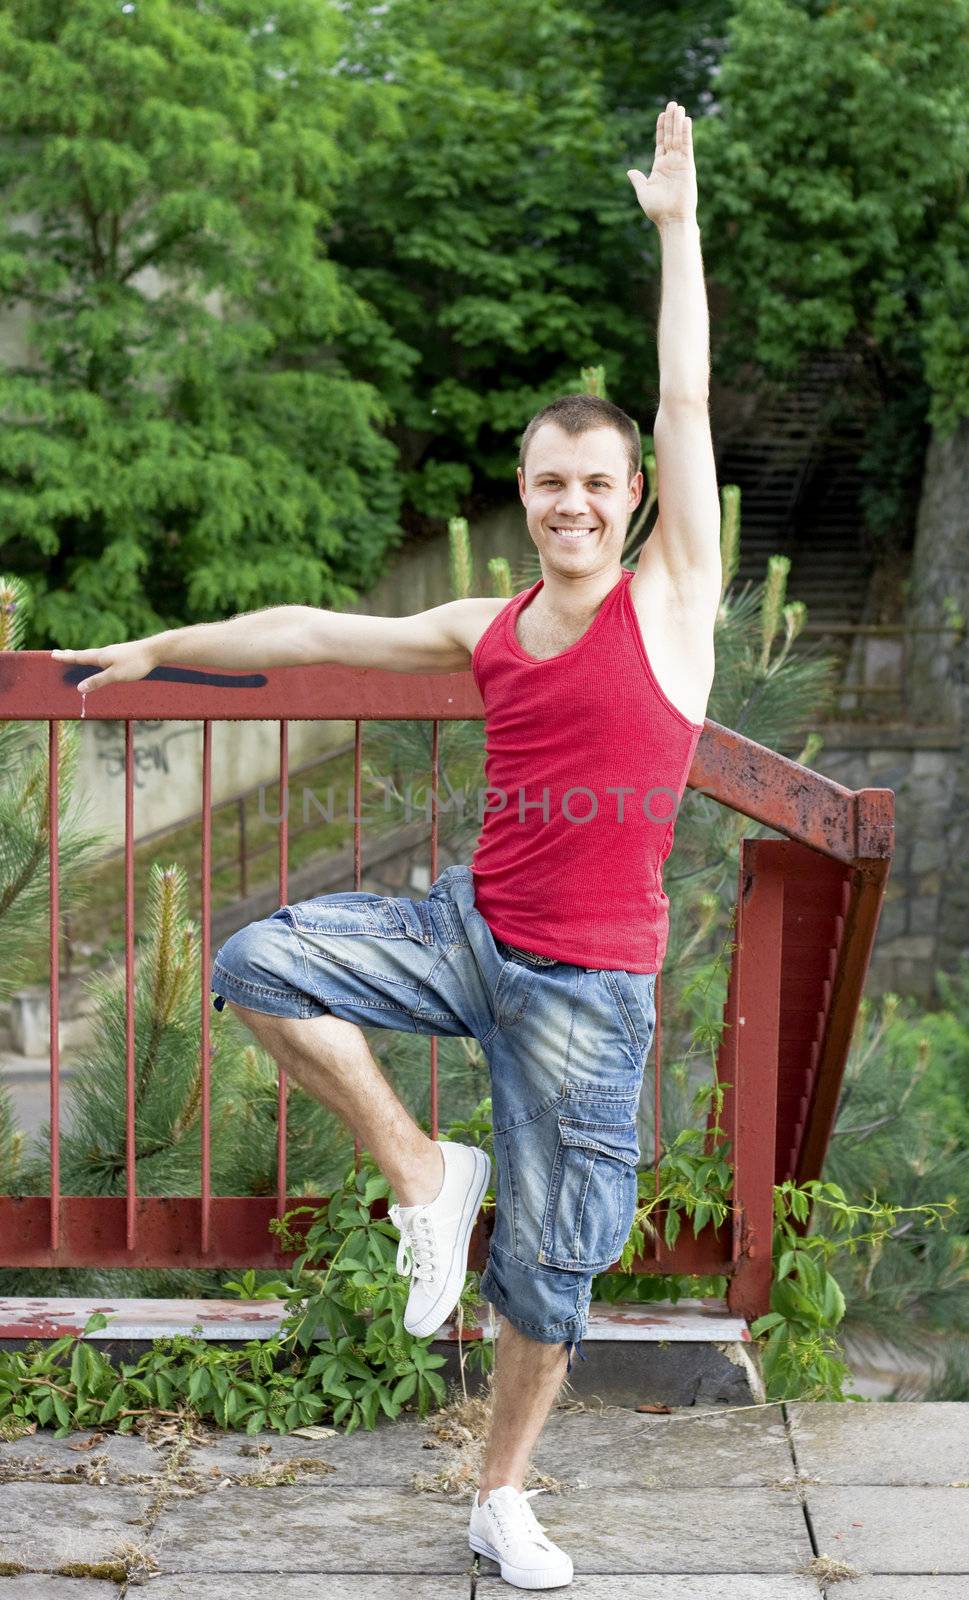 A smiling guy doing gymnastics, outdoors background